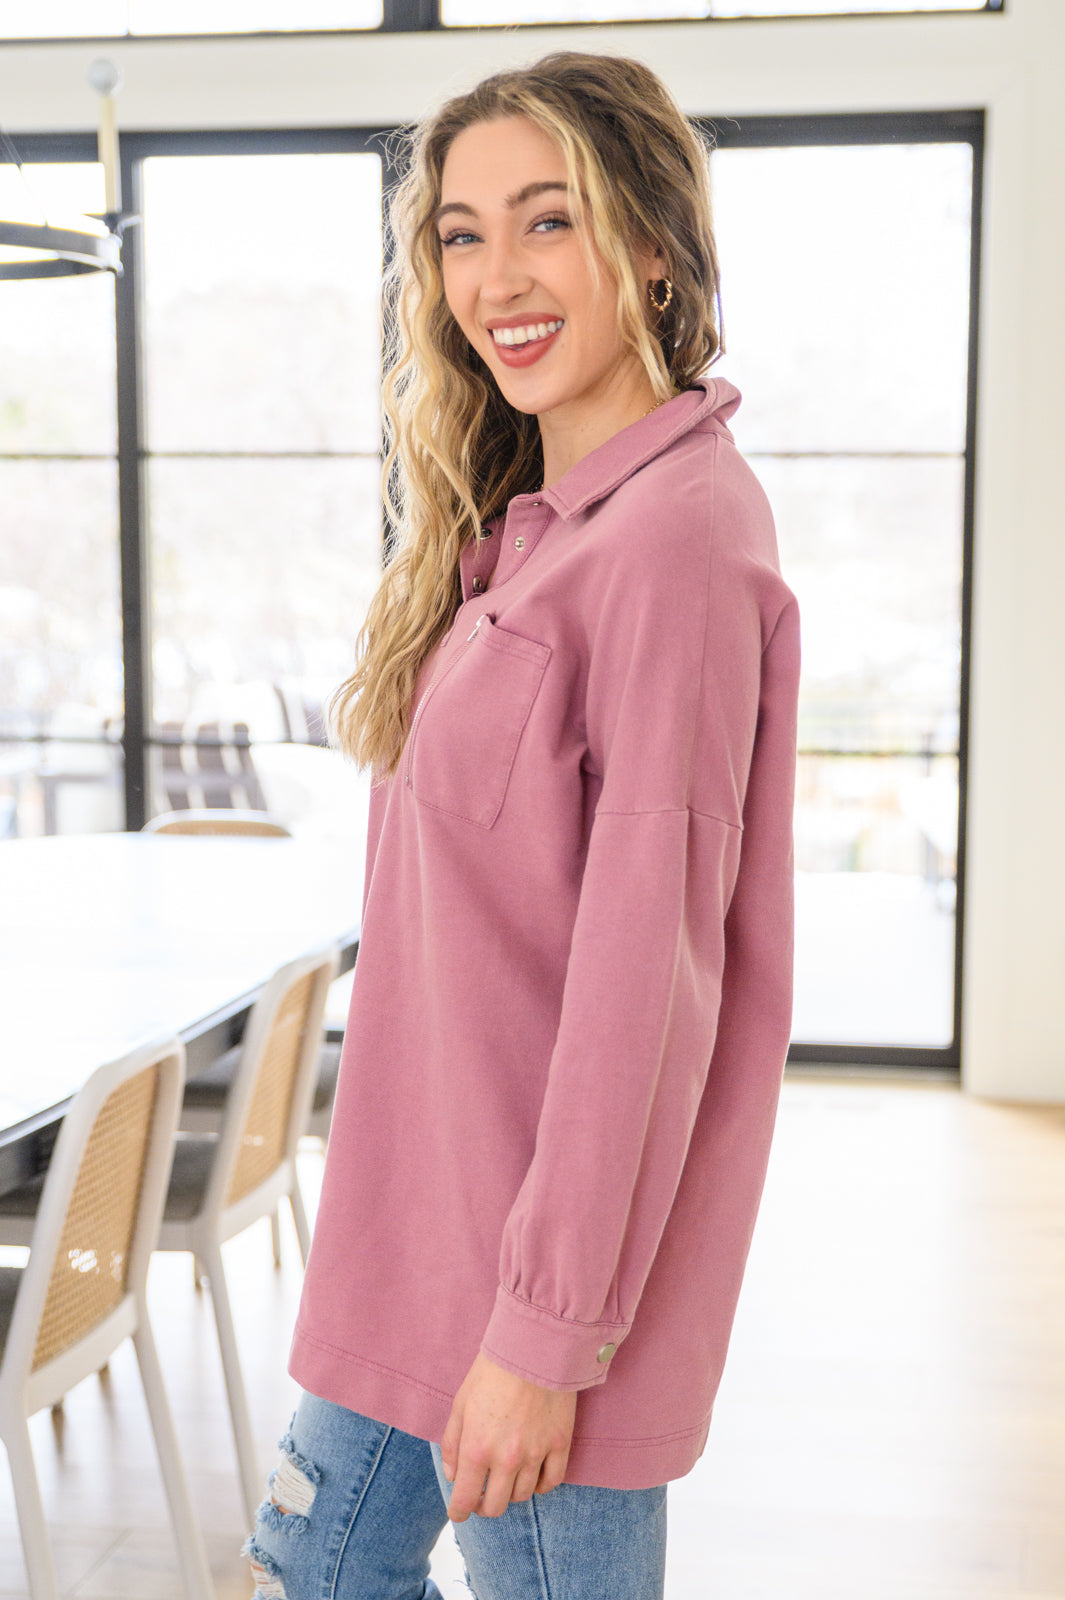 Sweet Crush Collar Pullover in Mauve-Sweaters/Sweatshirts-Inspired by Justeen-Women's Clothing Boutique in Chicago, Illinois